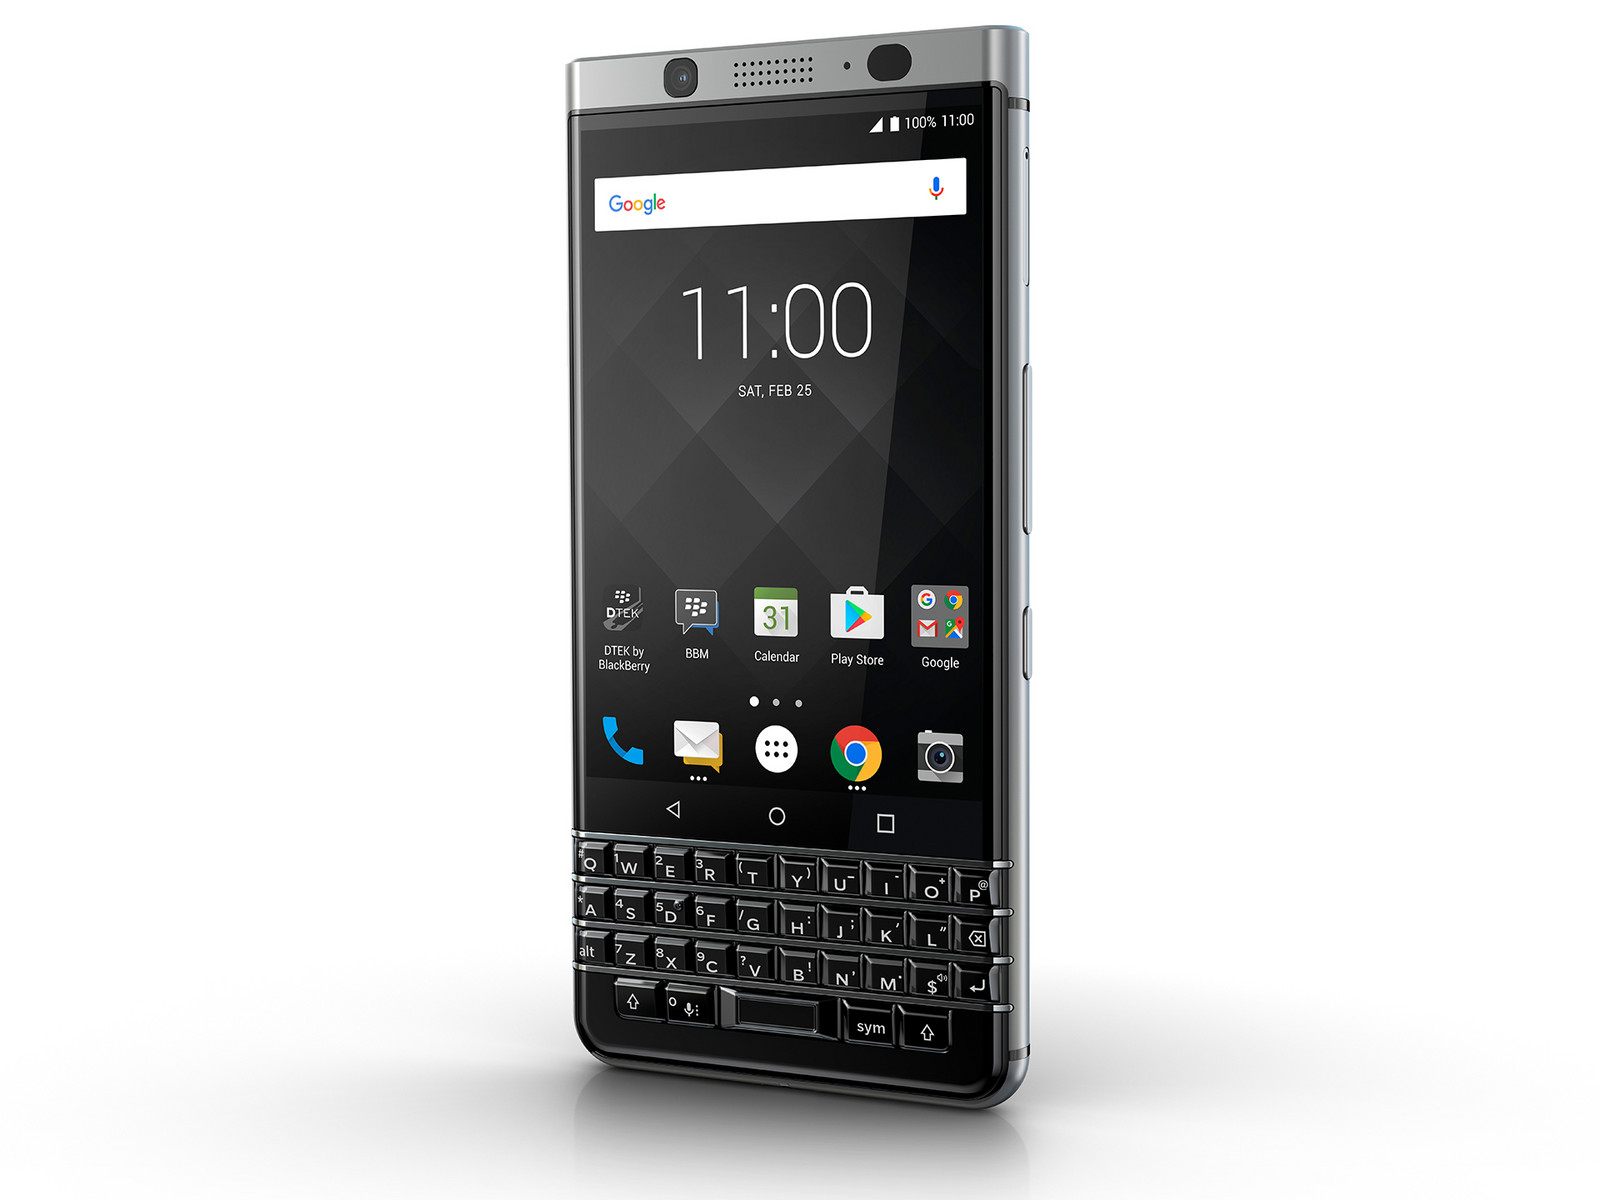 Canada's tech underdog story hits the big screen with BlackBerry